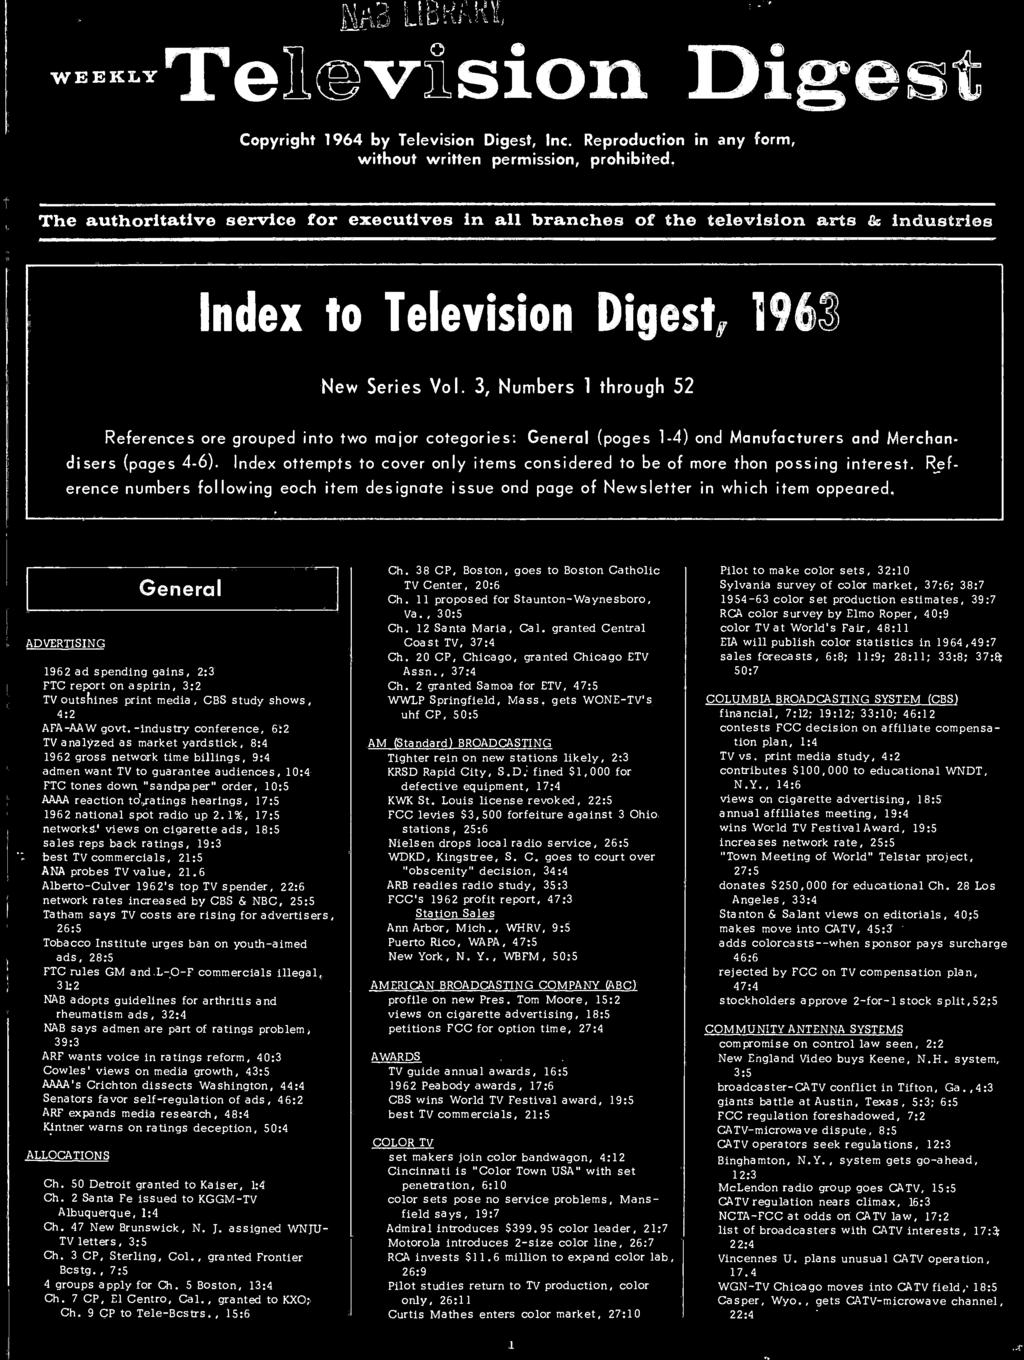 Television ÌI Diese WEE -LT Copyright 1964 by Television Digest, Inc. Reproduction in any form, without written permission, prohibited.